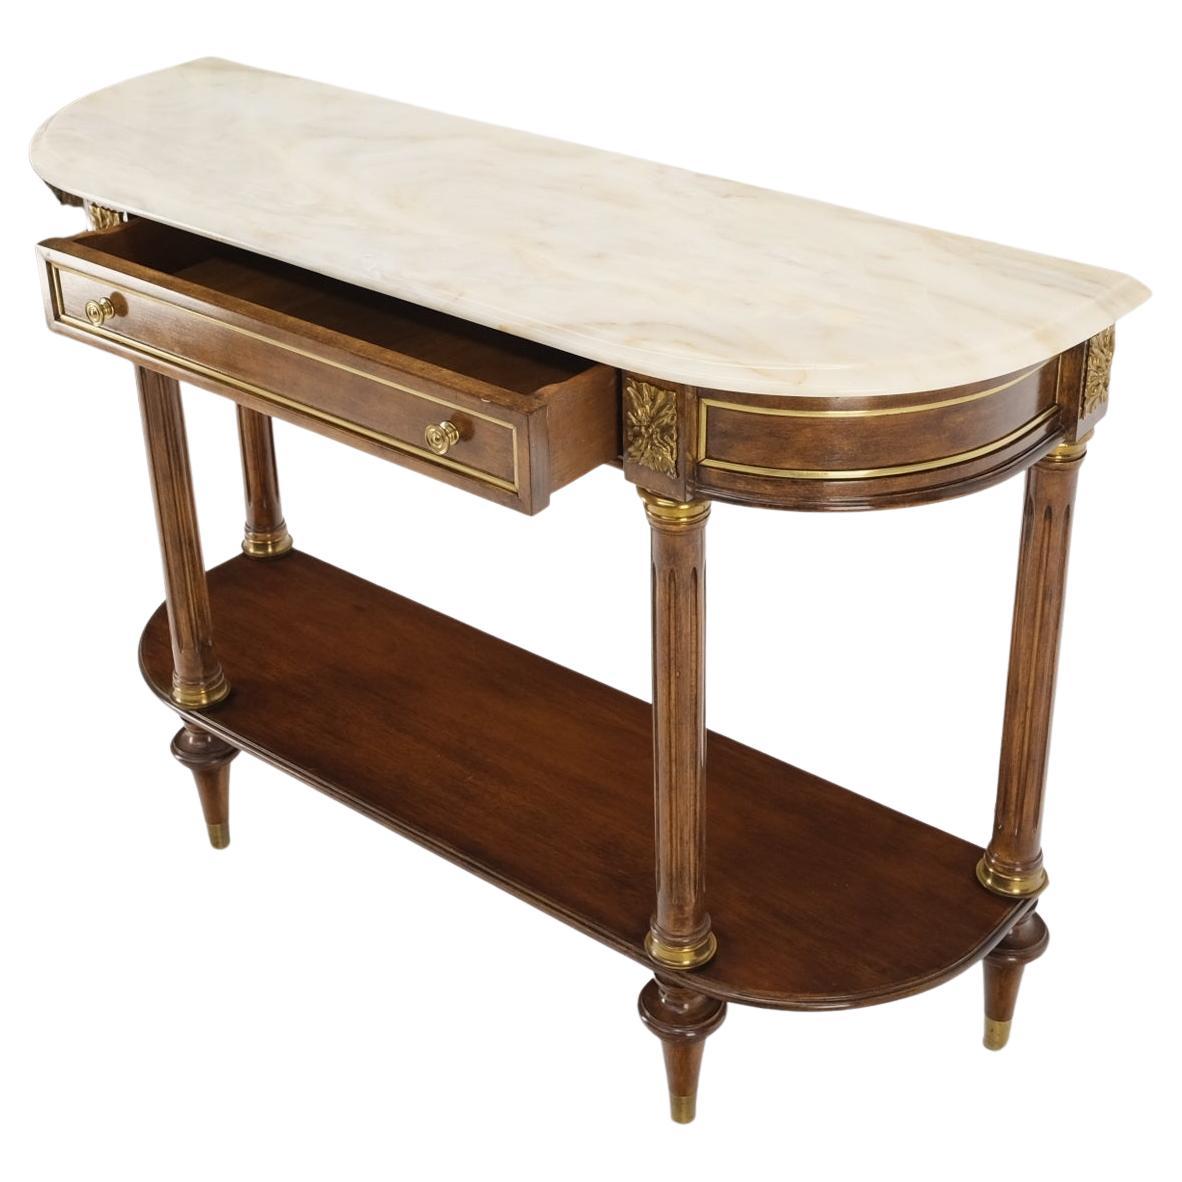 Neo Classical Walnut Brass Marble Top Demi Lune Shape Drawer Console Sofa Table